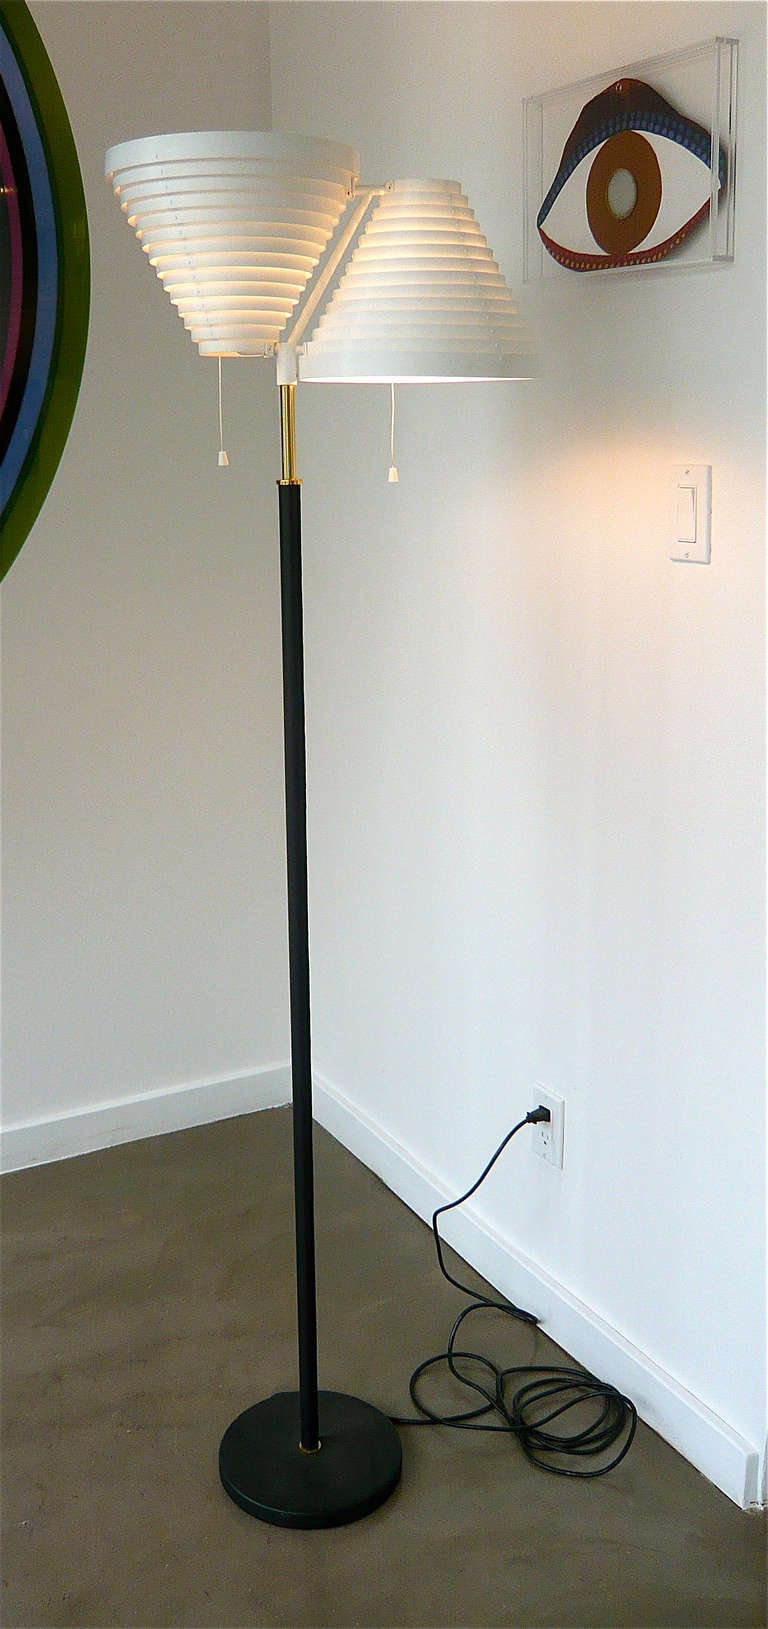 Designed by Aalto in 1955 for Artek,Finland.Hand riveted steel shade on leather wrapped black steel base with brass accent and pull cords.